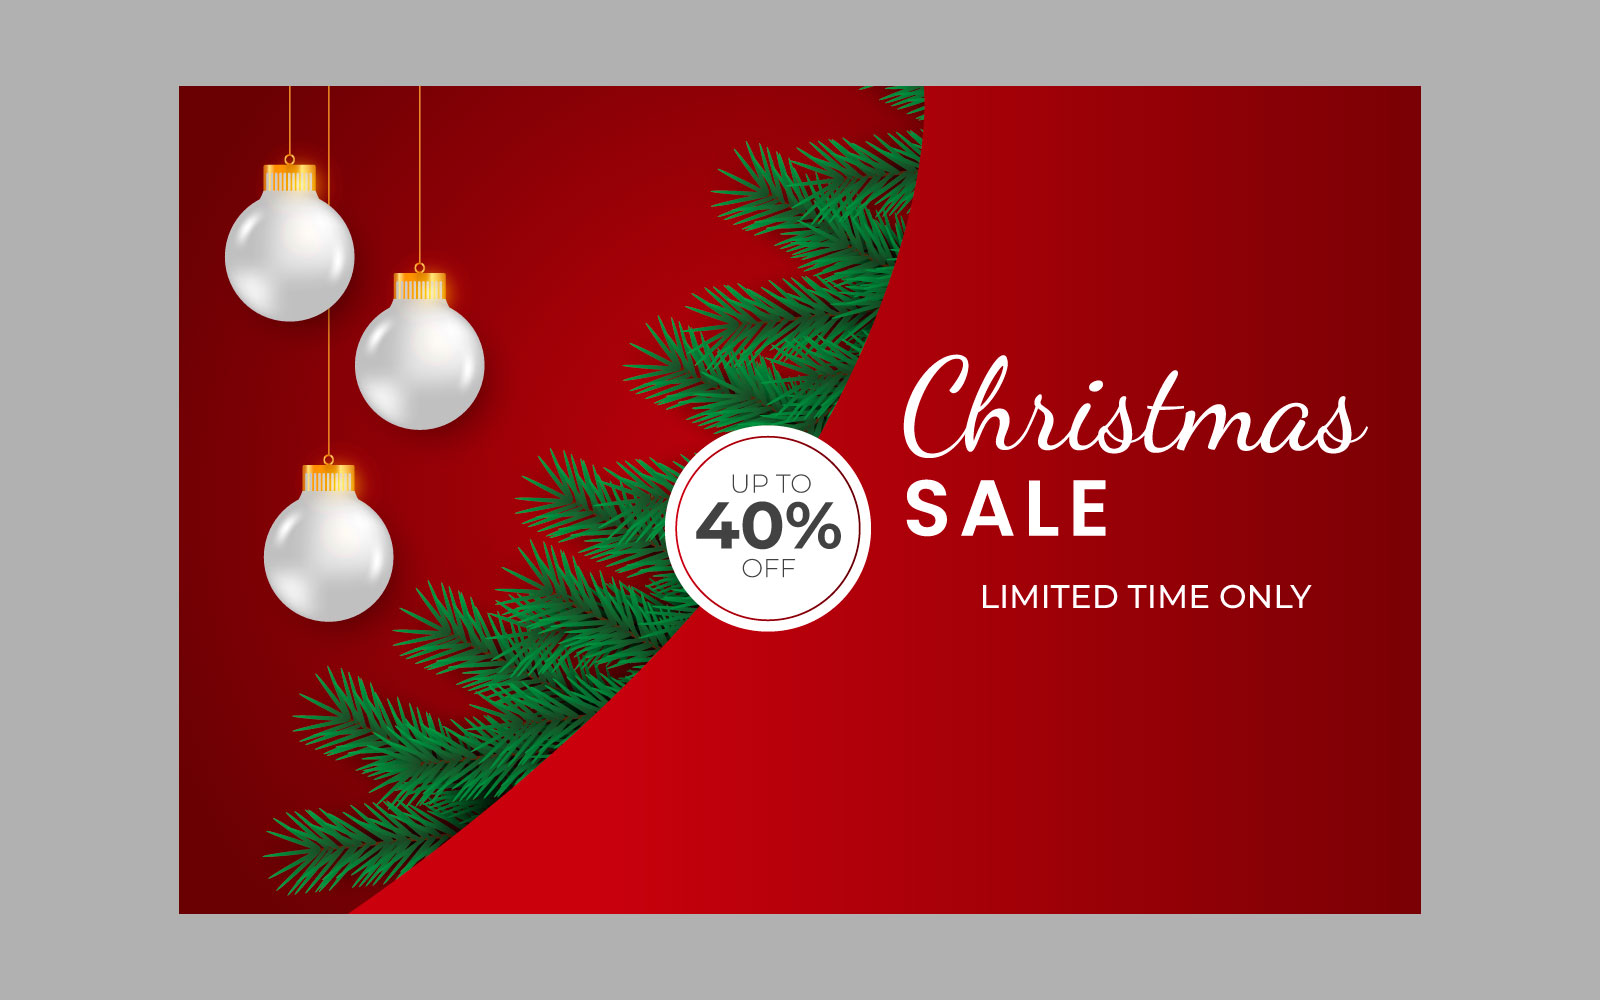 Merry Christmas sale post social media post decoration with pine branches and ball